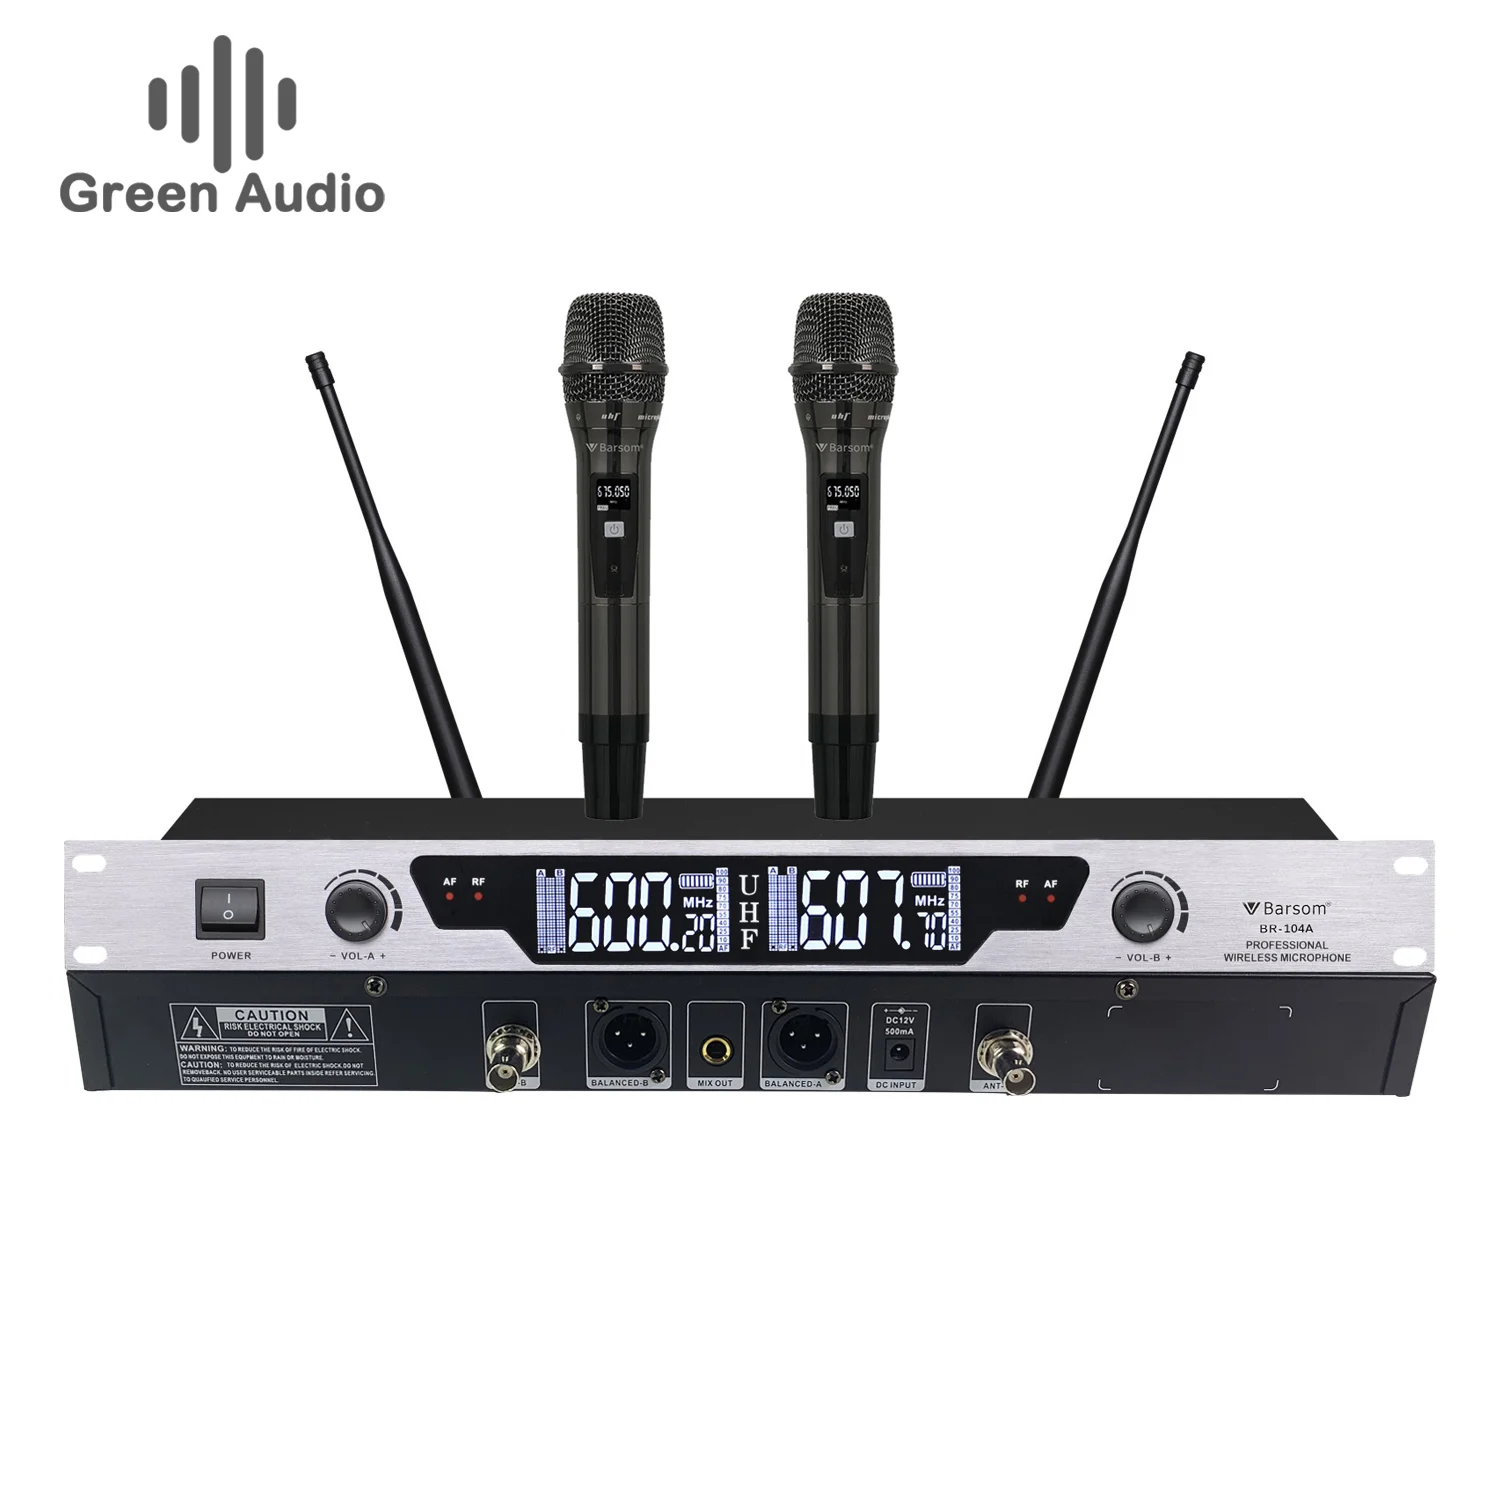 

GAW-BR104 UHF All-Metal One-to-Two Wireless Microphone Karaoke Conference Performance Teaching